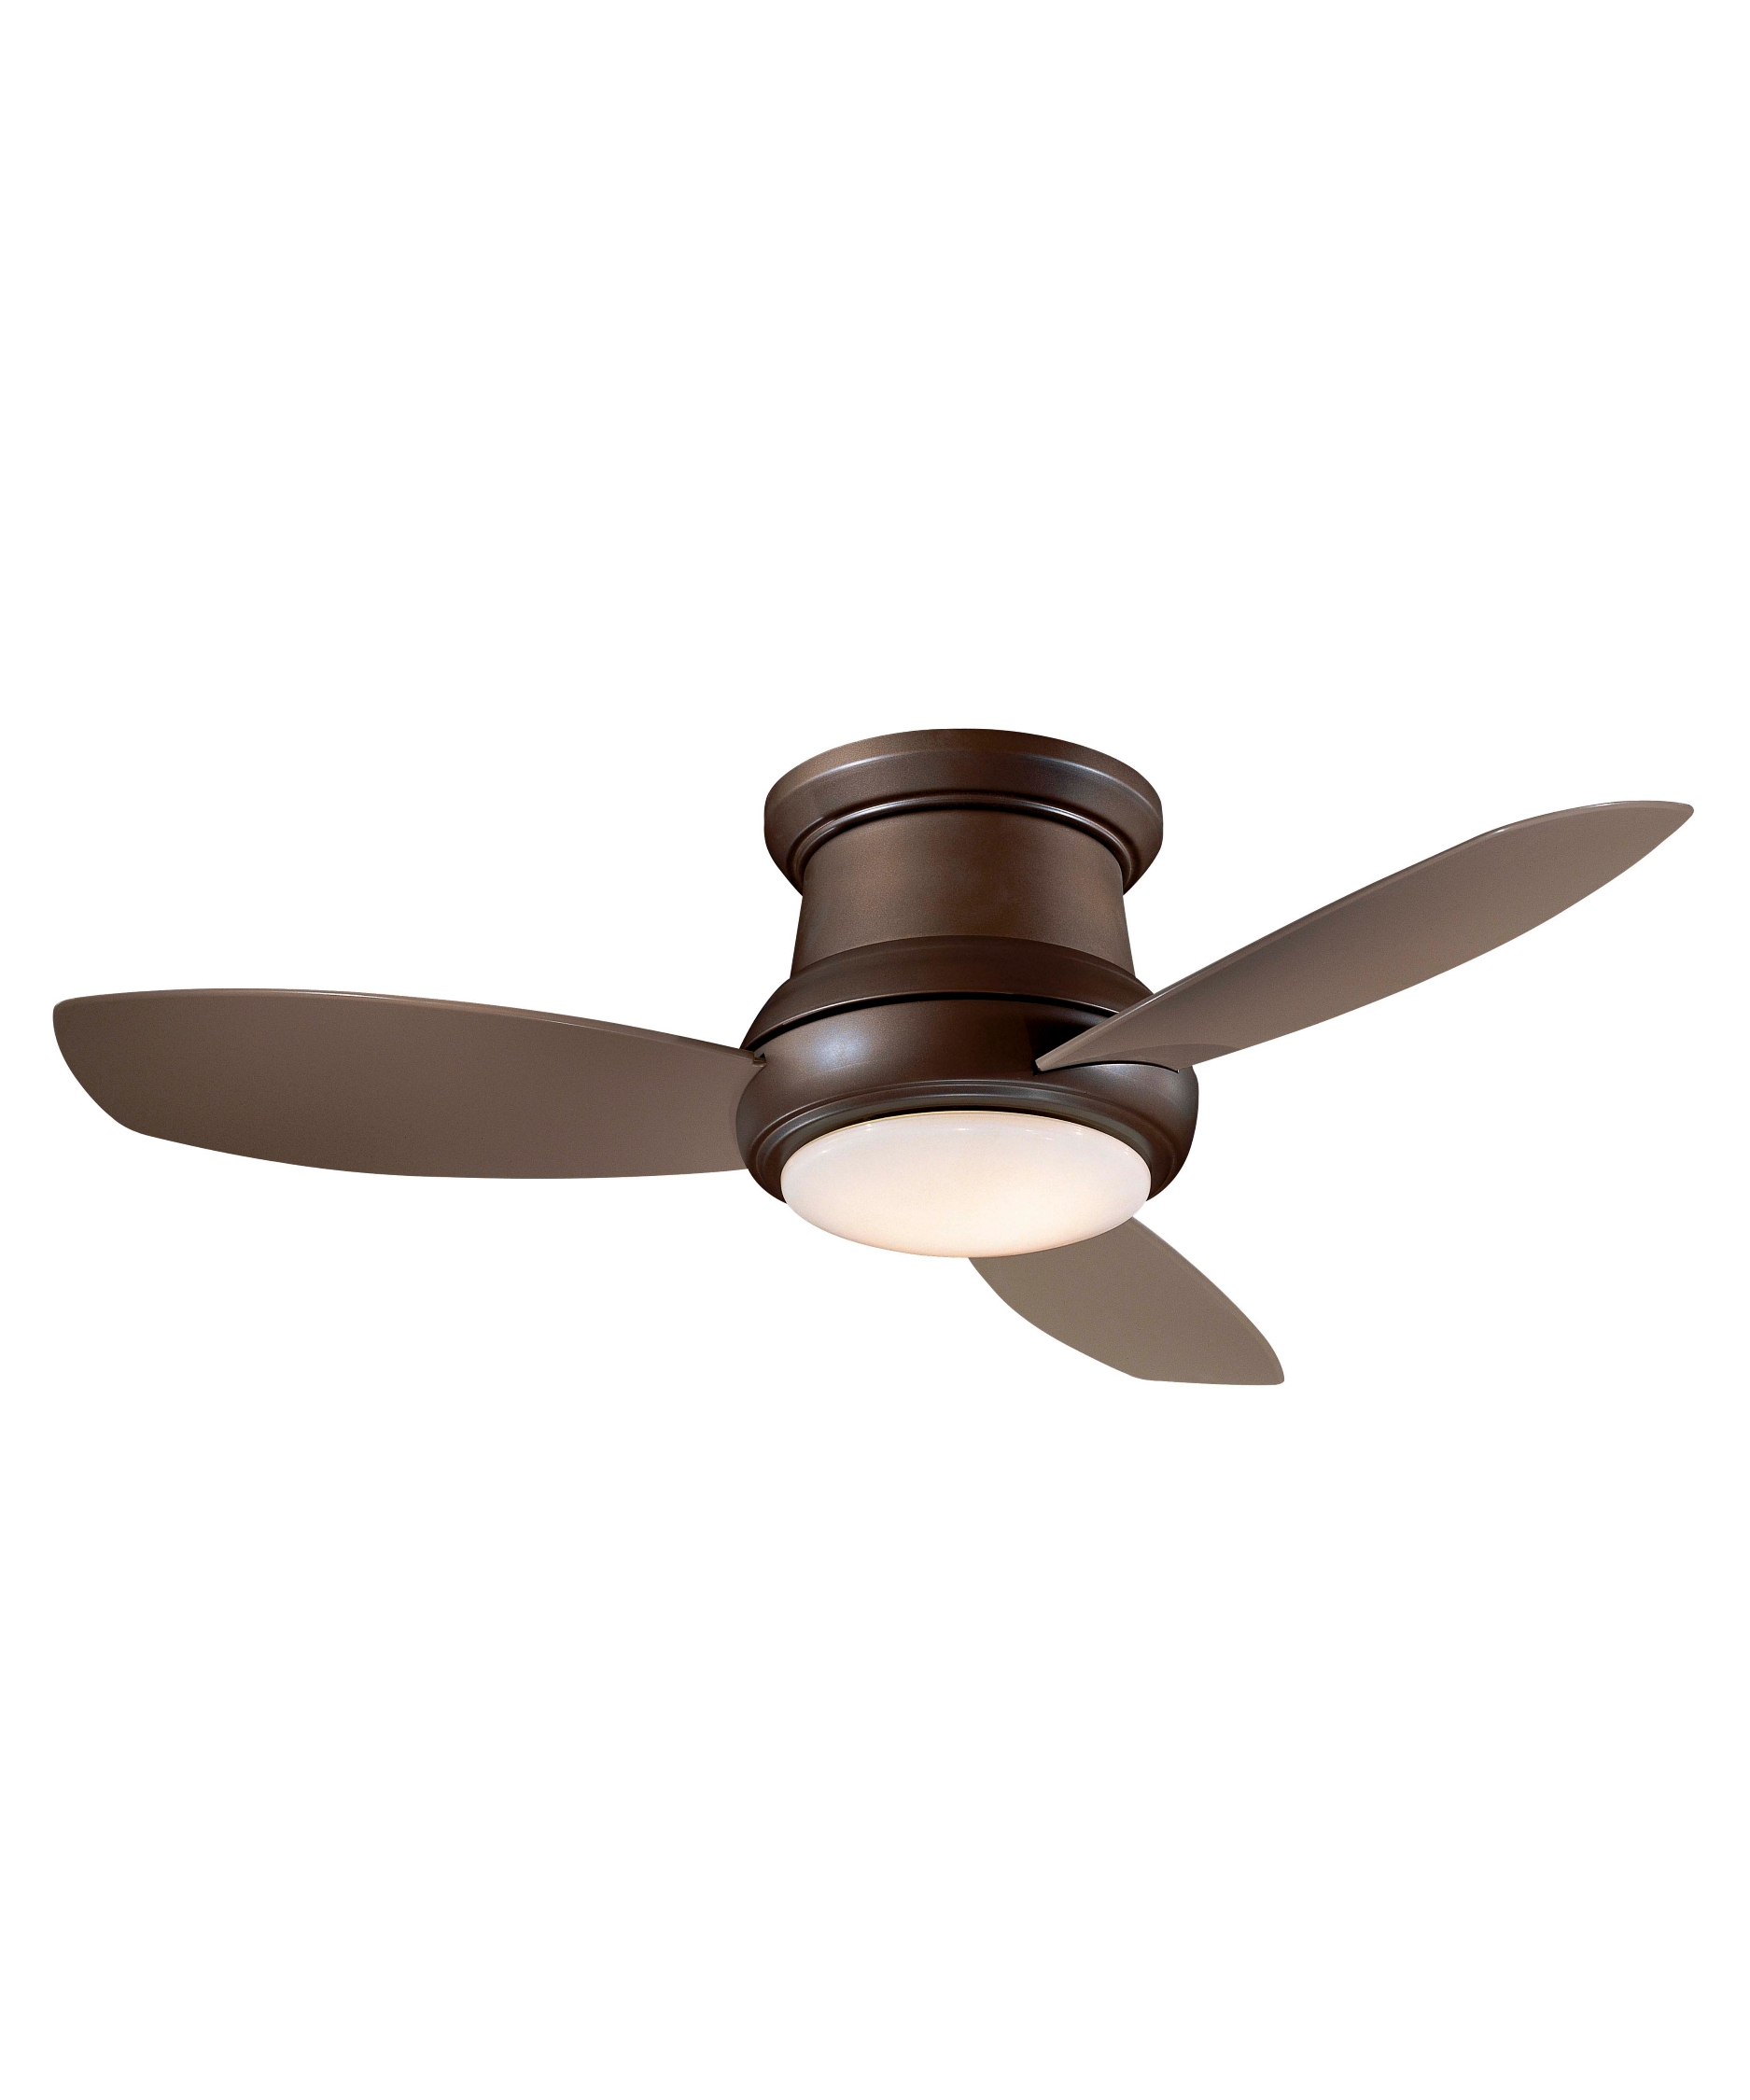 Permalink to Oil Rubbed Bronze Ceiling Fan With Light Flush Mount